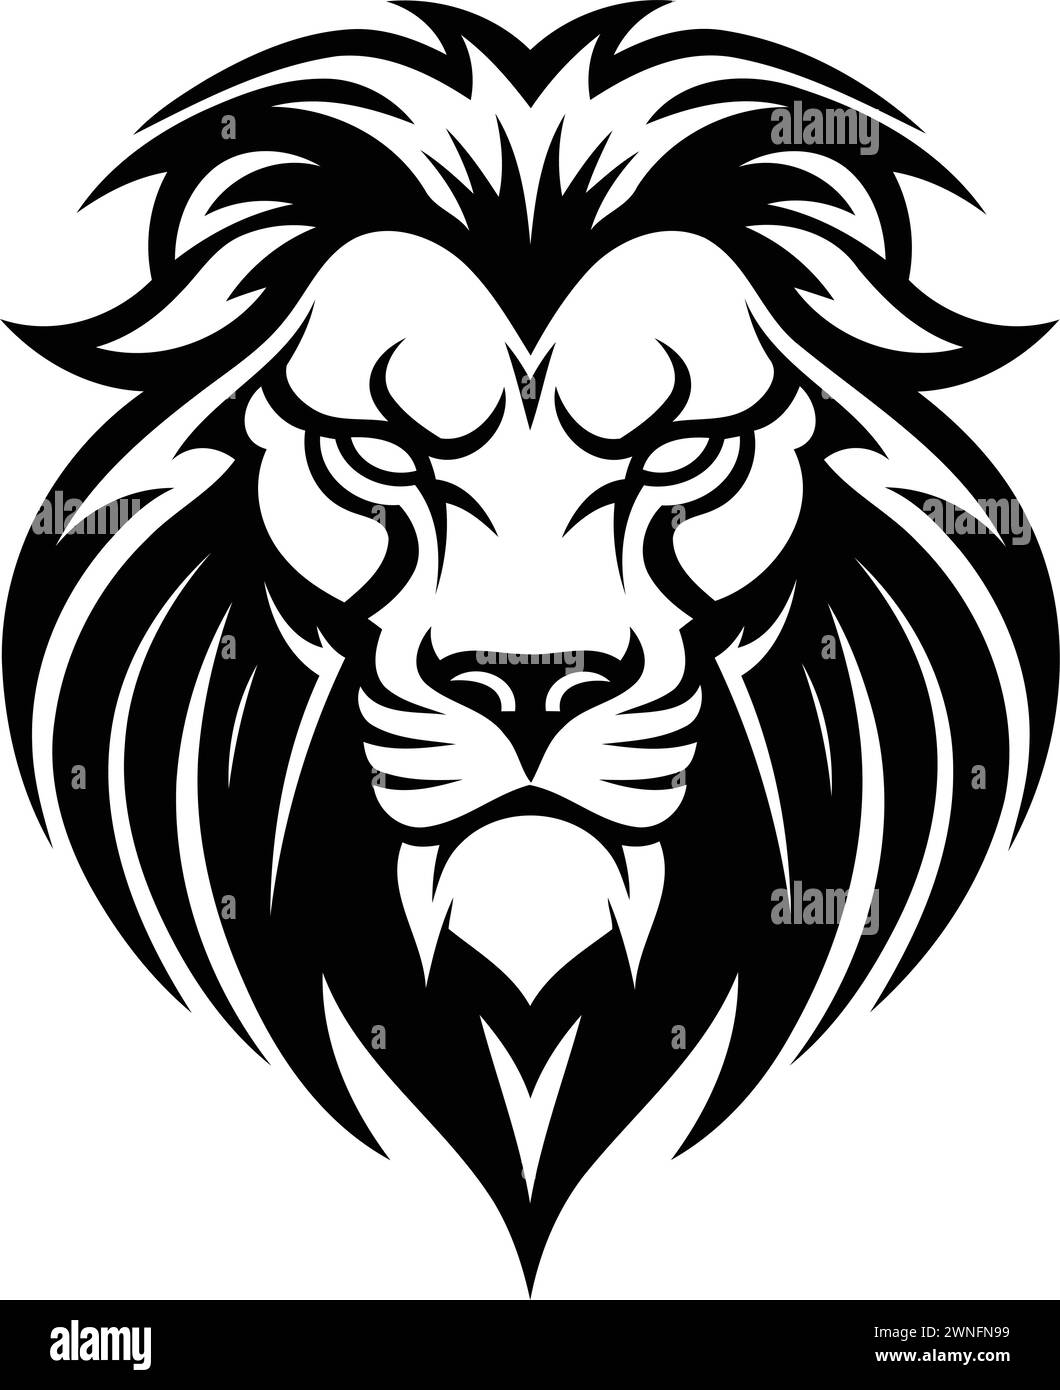 Lion head tattoo. black and white vector illustration isolated on white background. Stock Vector